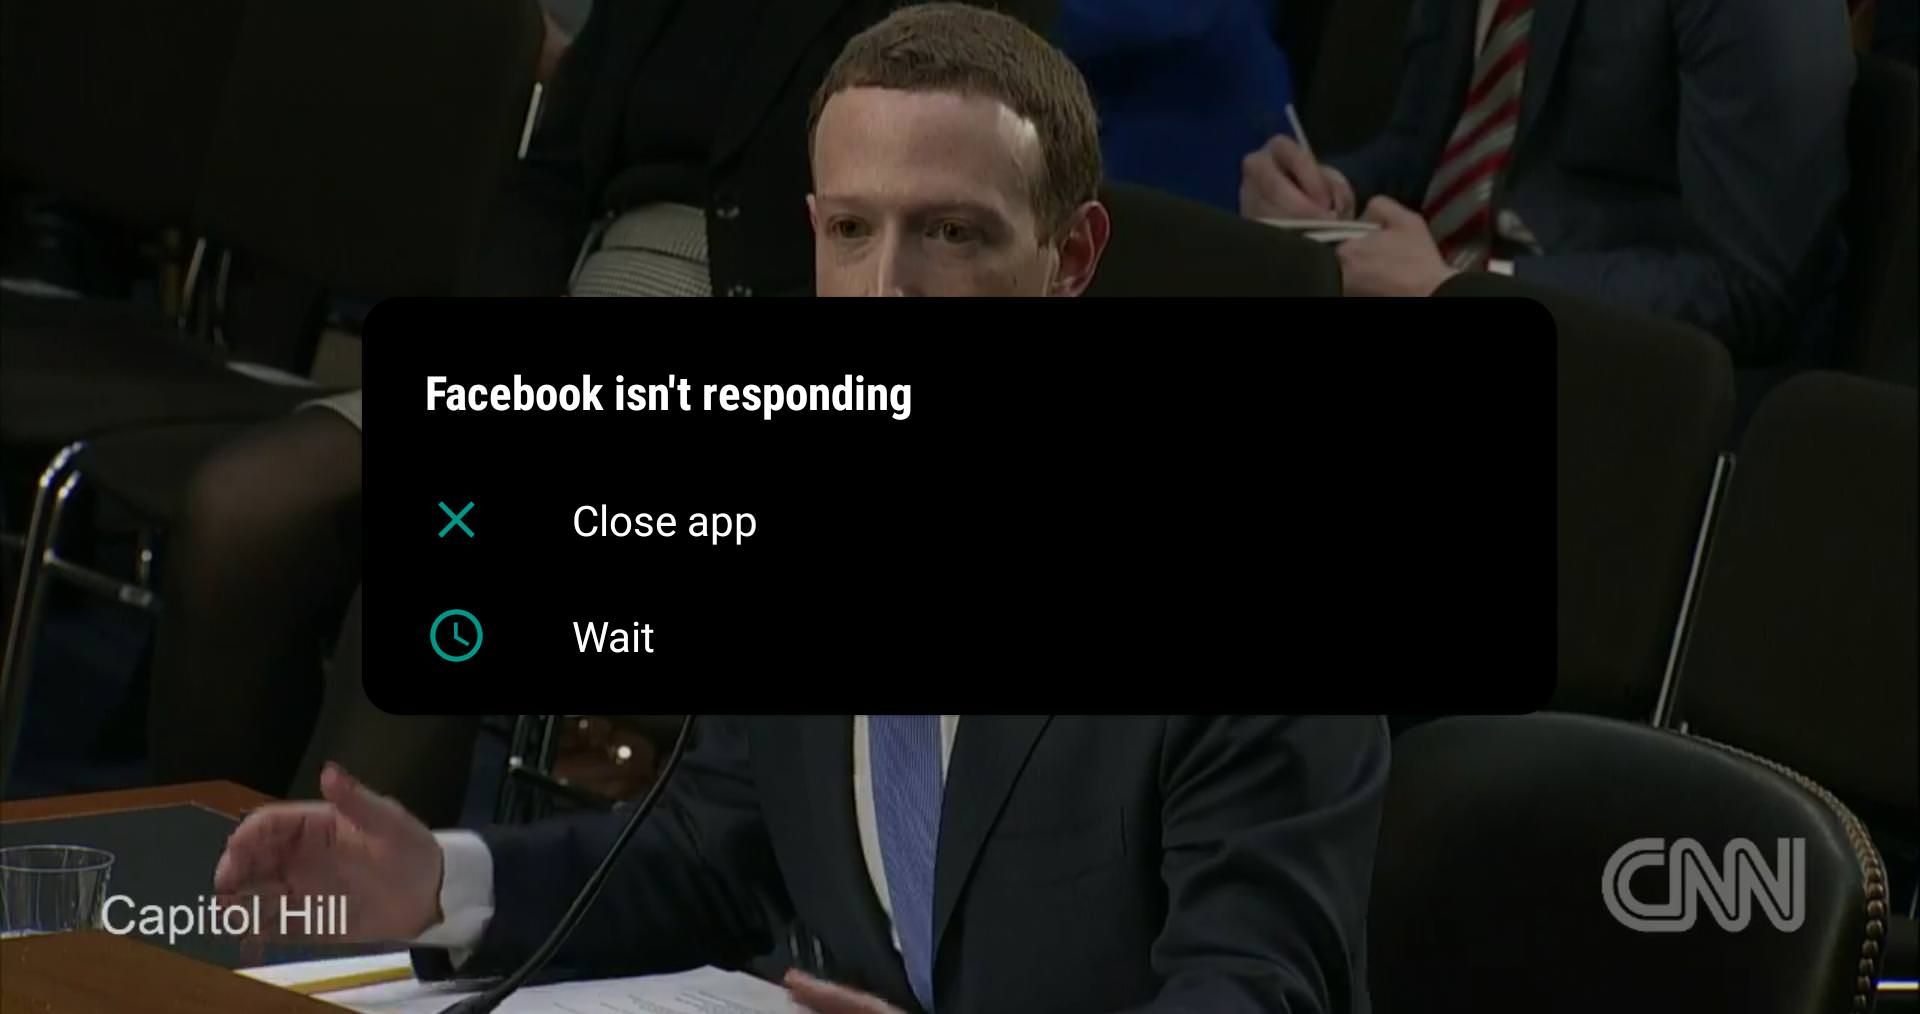 A great coincidence happened while watching the Zucc on my phone.